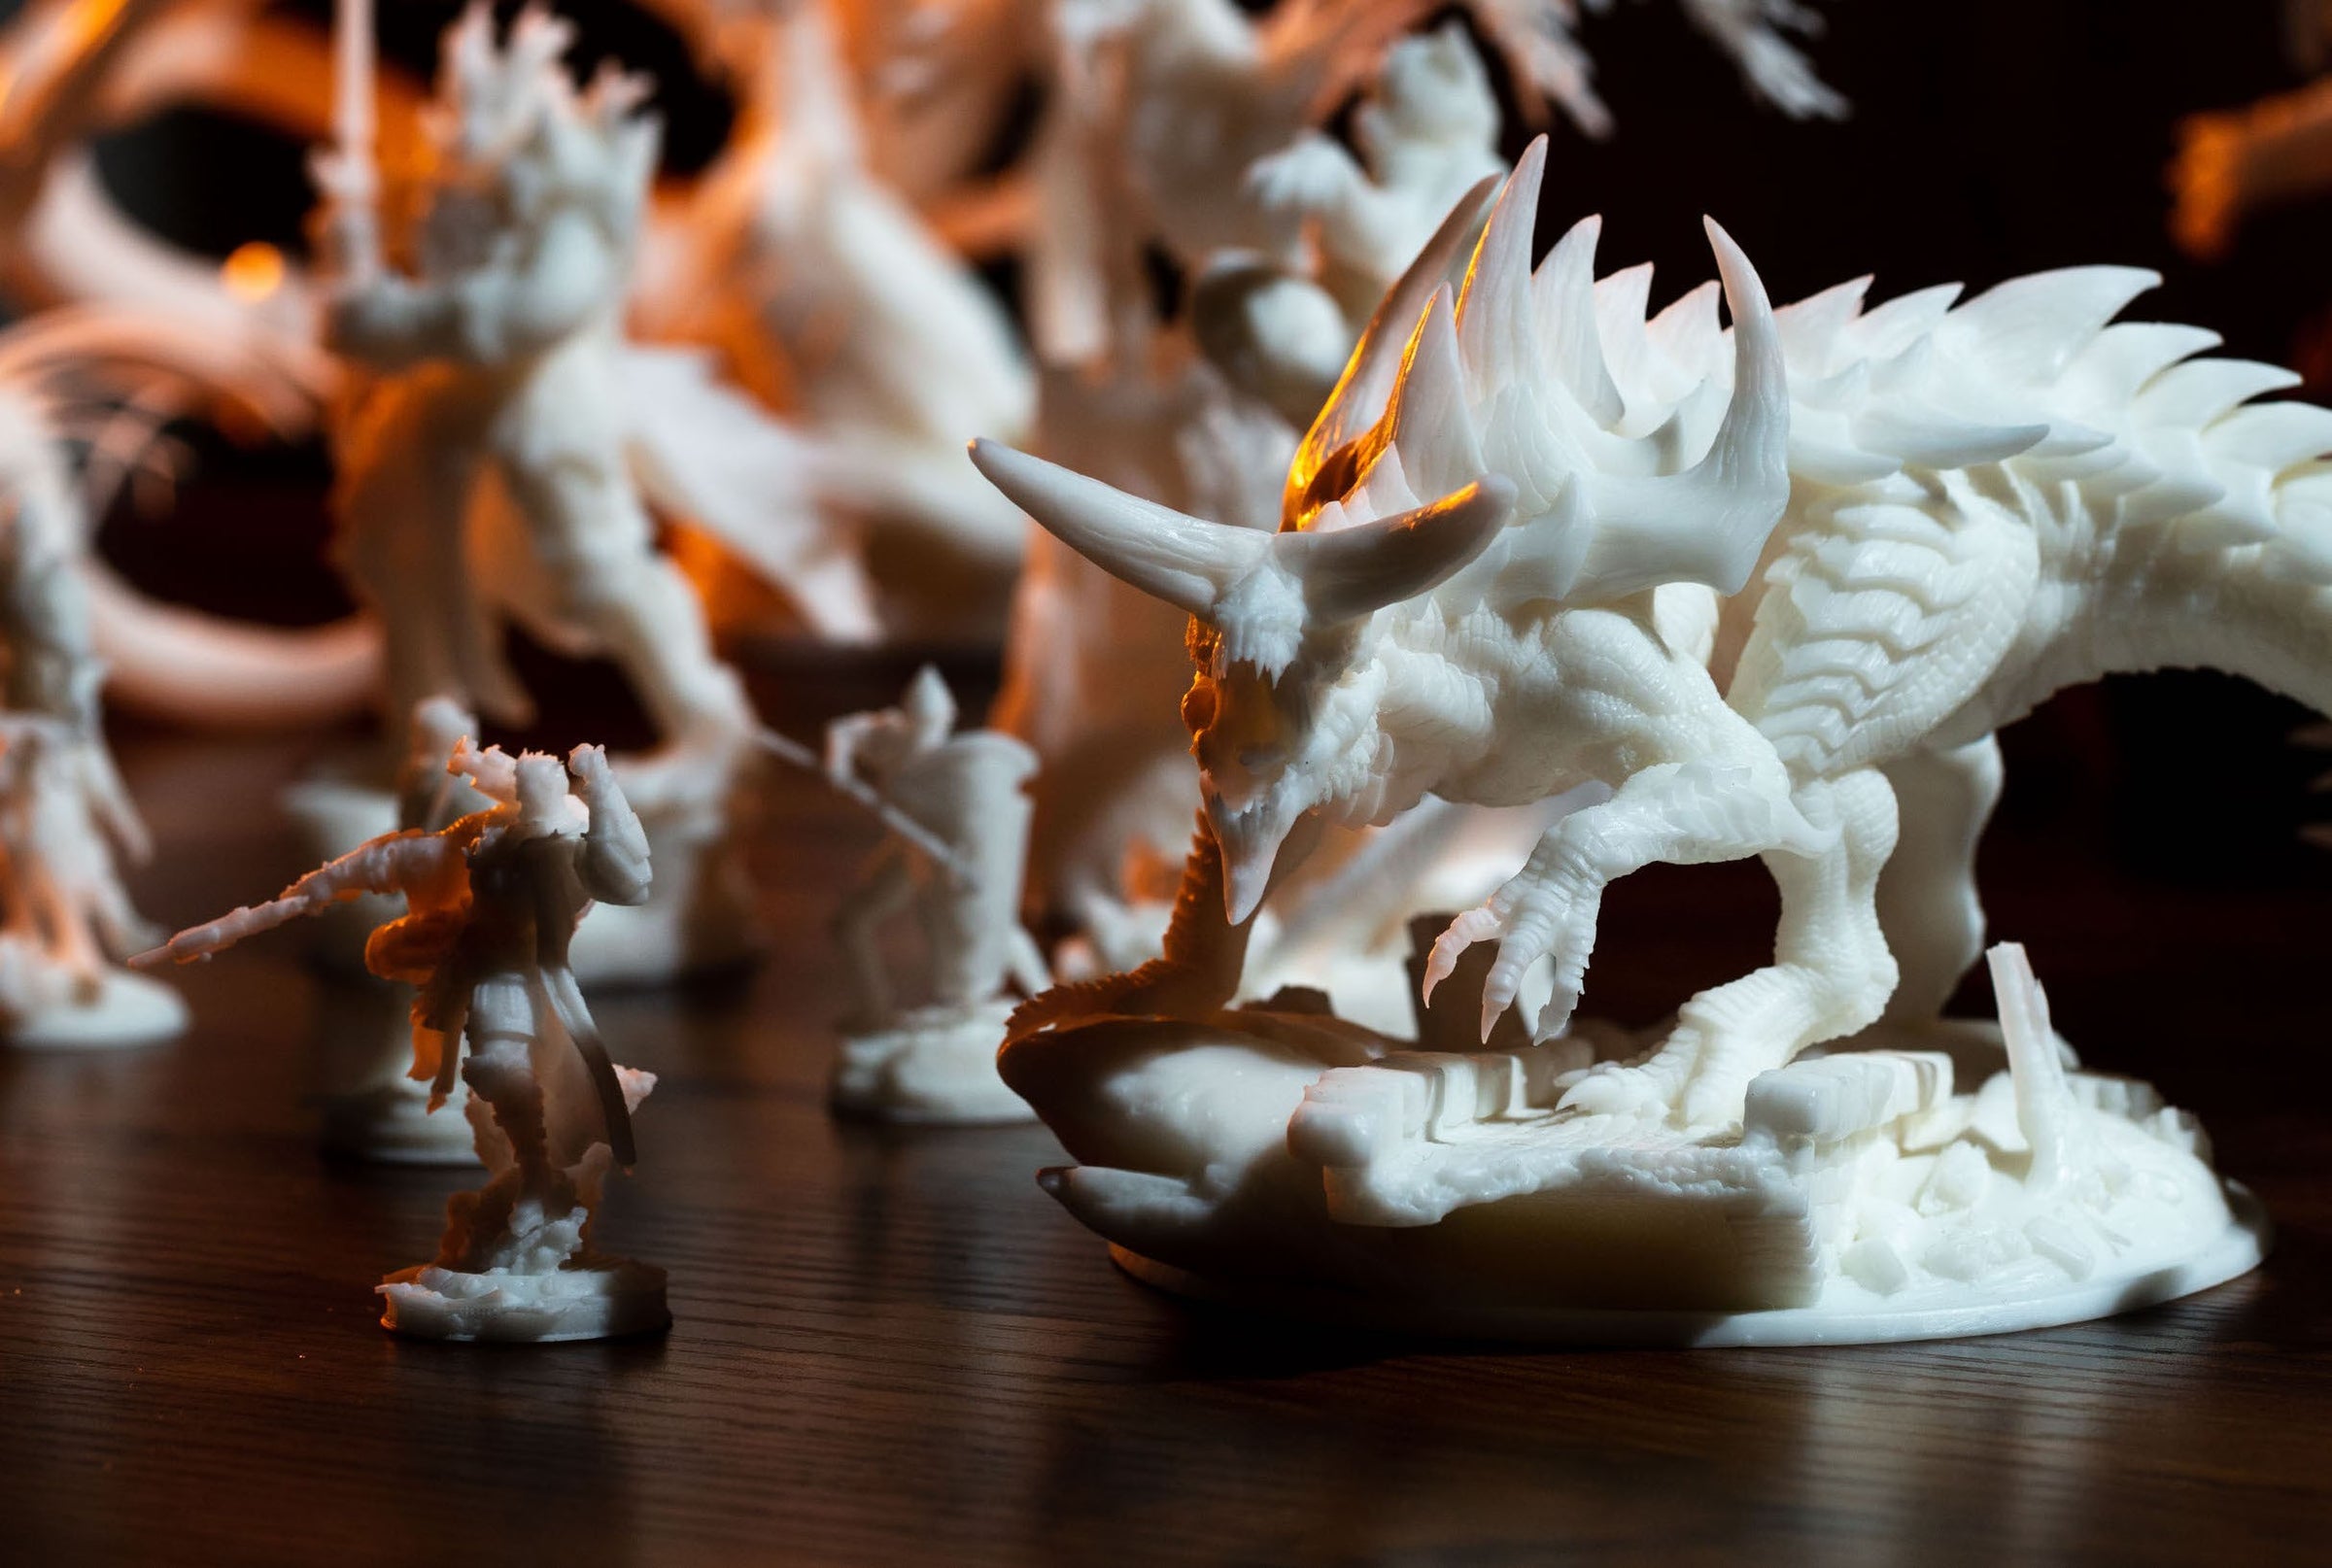 Army & Creatures Minis by Uproar Design & Print